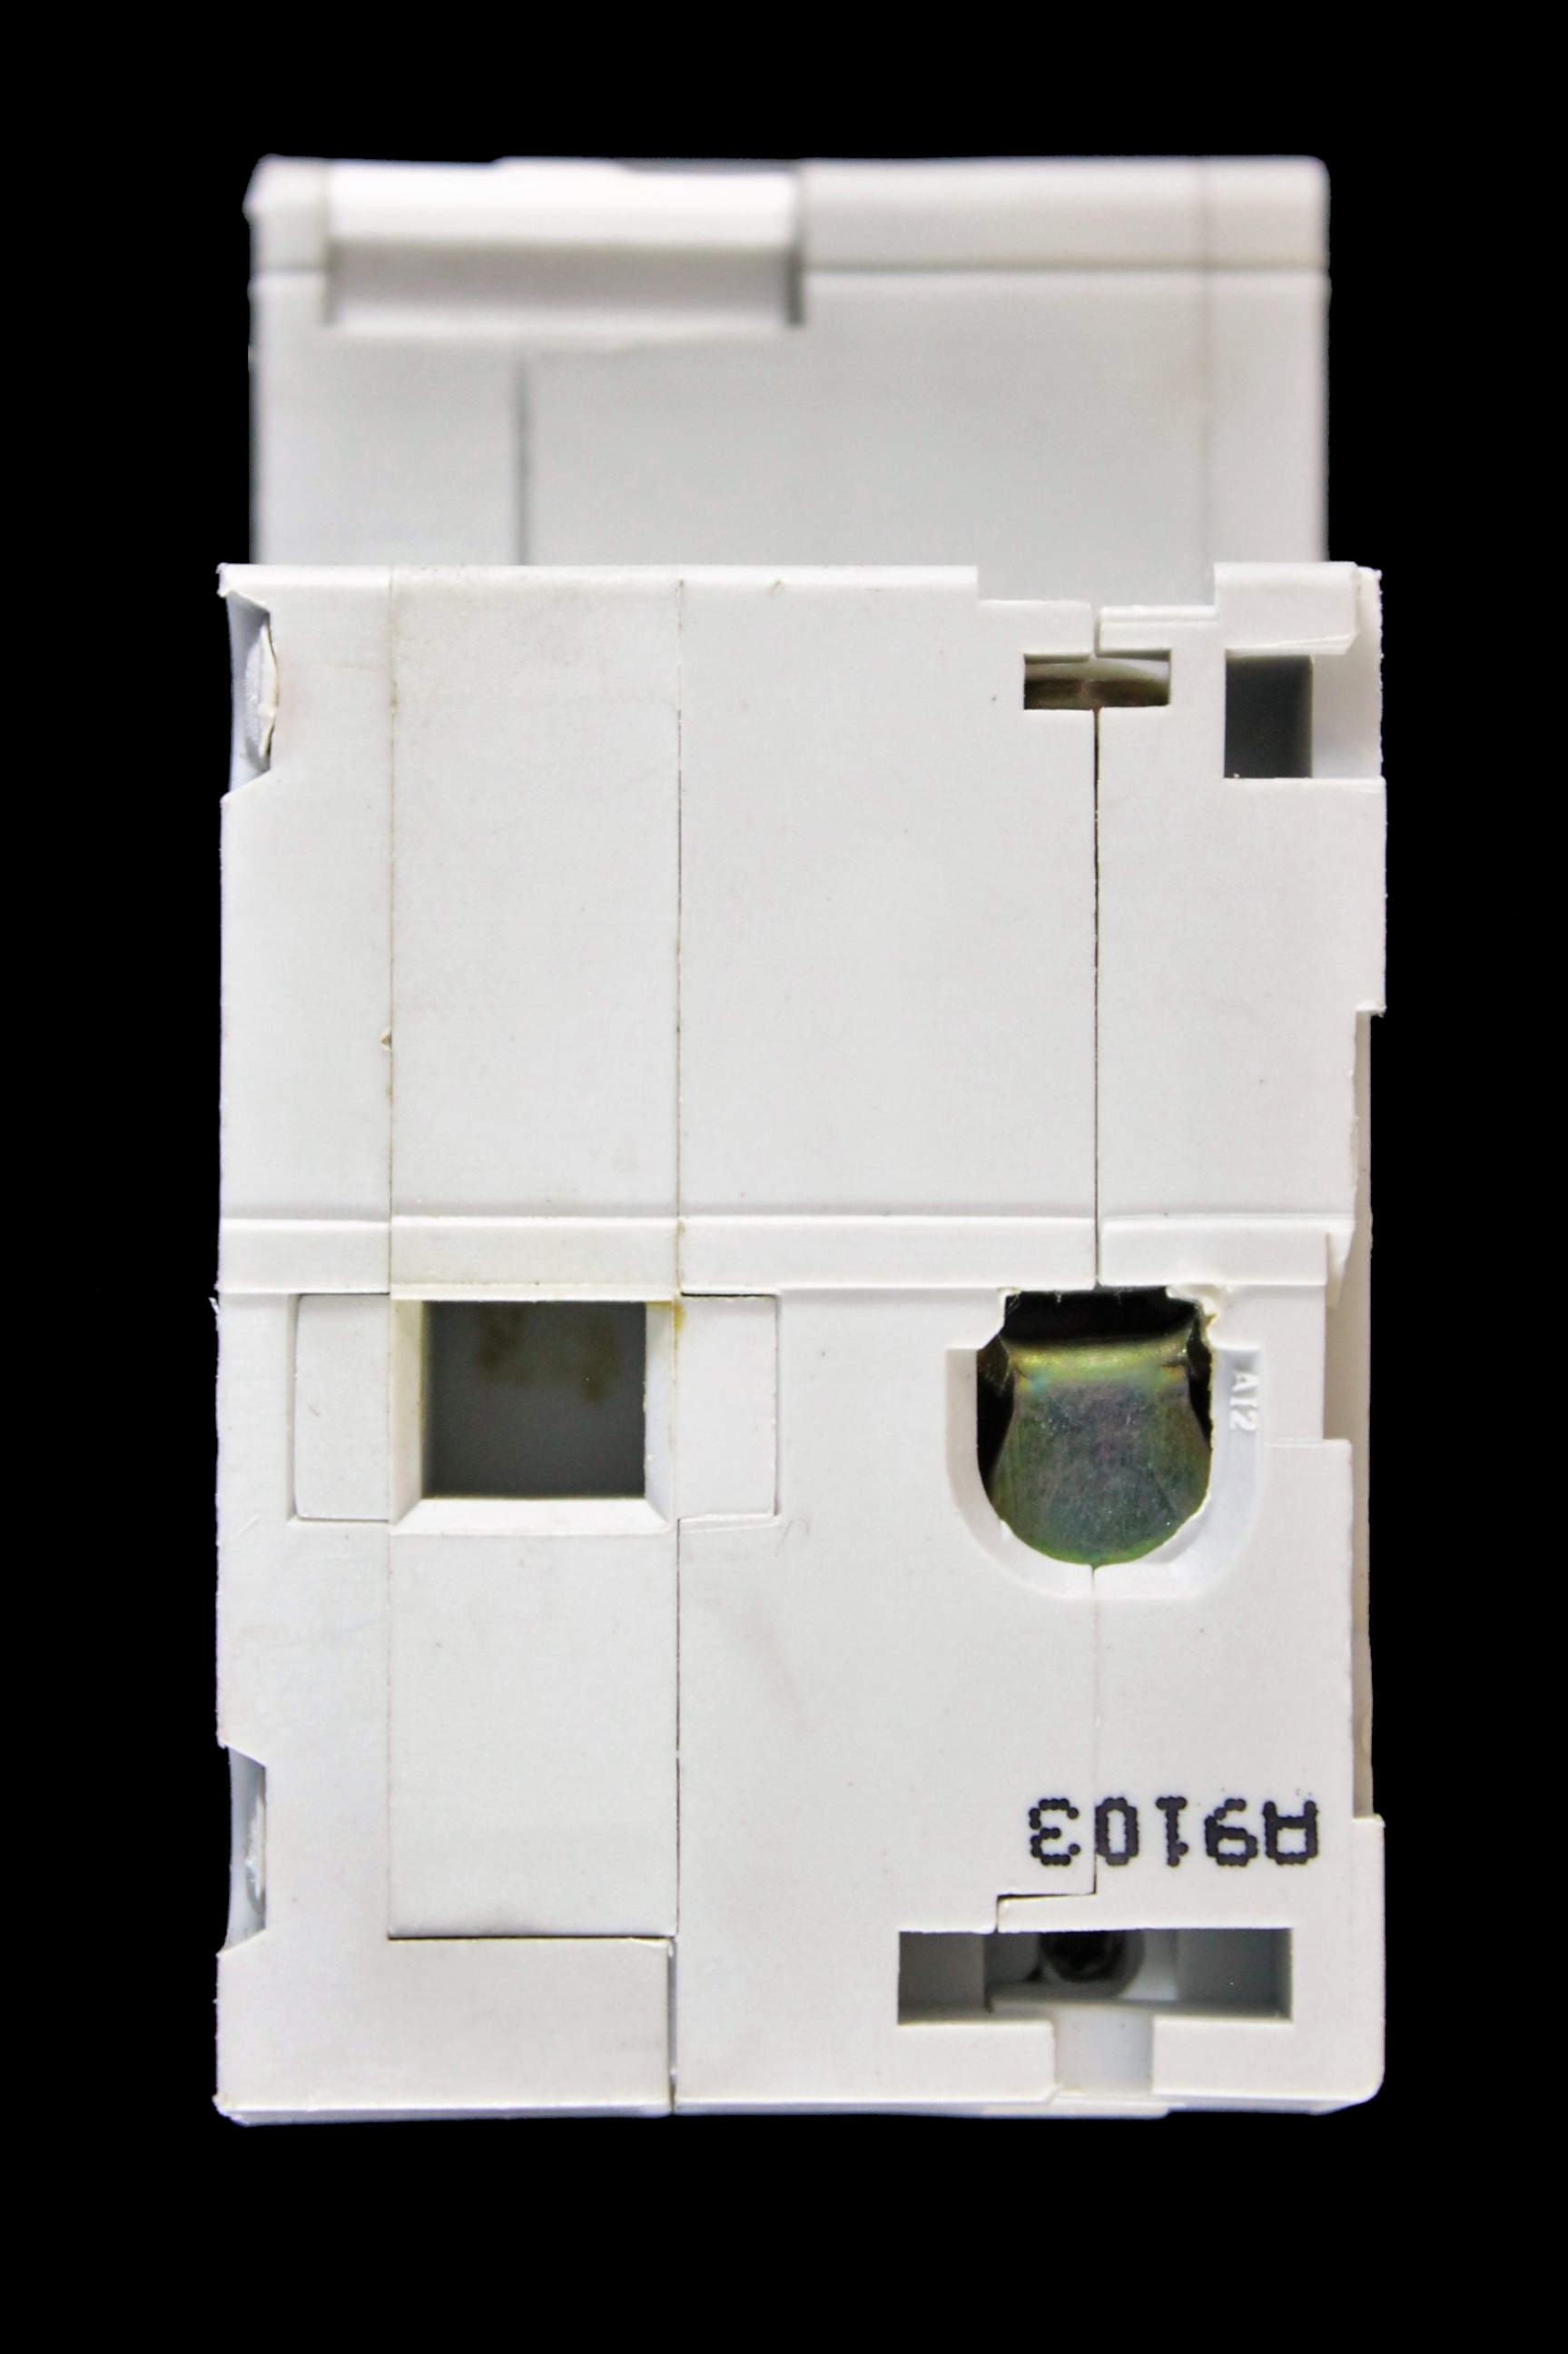 MERLIN GERIN 20 AMP TYPE 2 M9 30mA DOUBLE POLE MCB/RCD RCBO V40H 26896